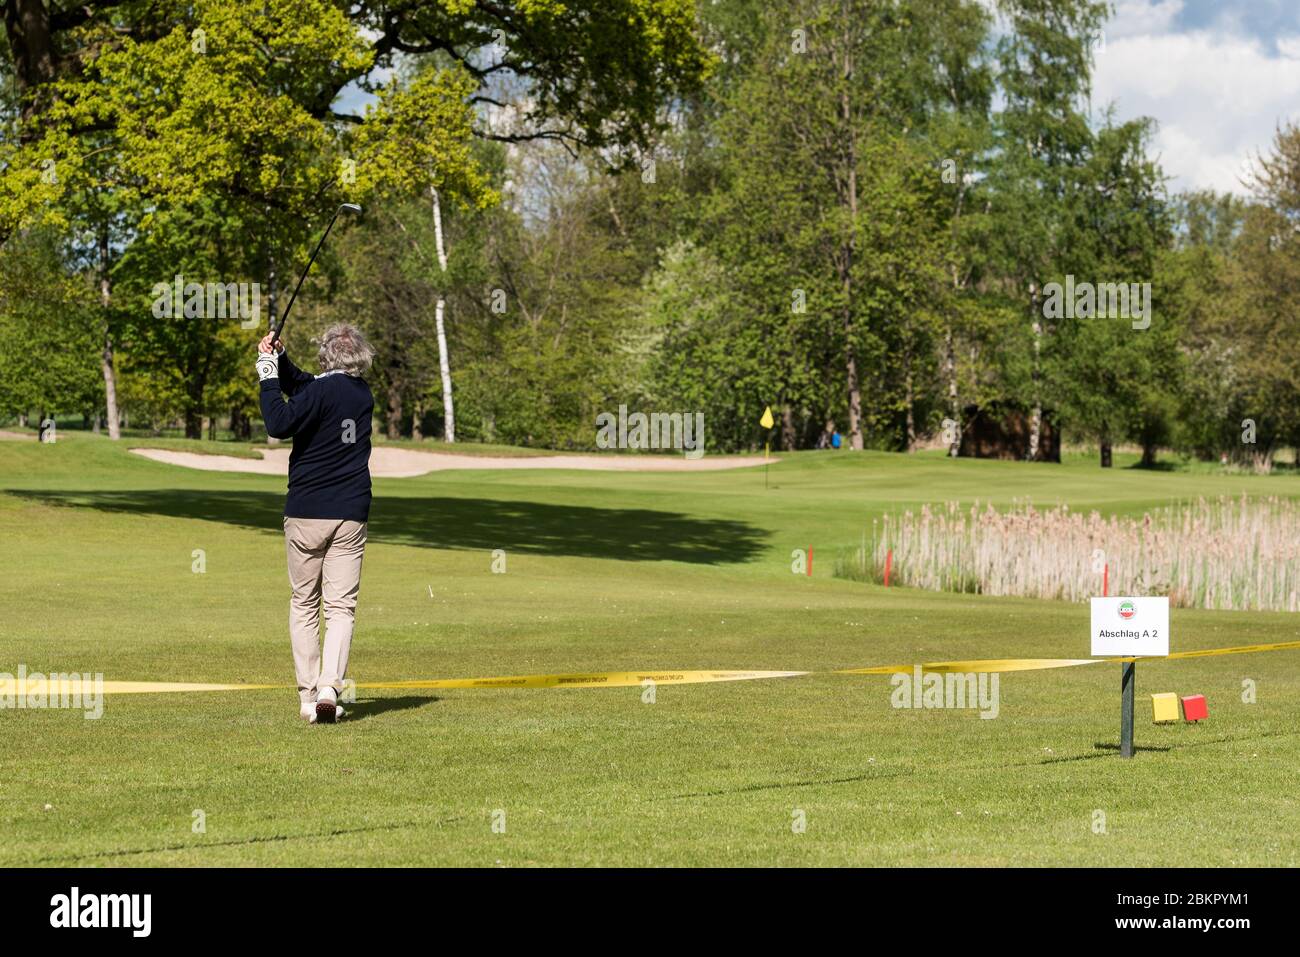 05 May 2020, Hamburg: A man hits a ball at the shortened tee A2 on the  grounds of the Hamburg-Wendlohe Golf Club behind a barrier tape on the  Schleswig-Holstein side of the